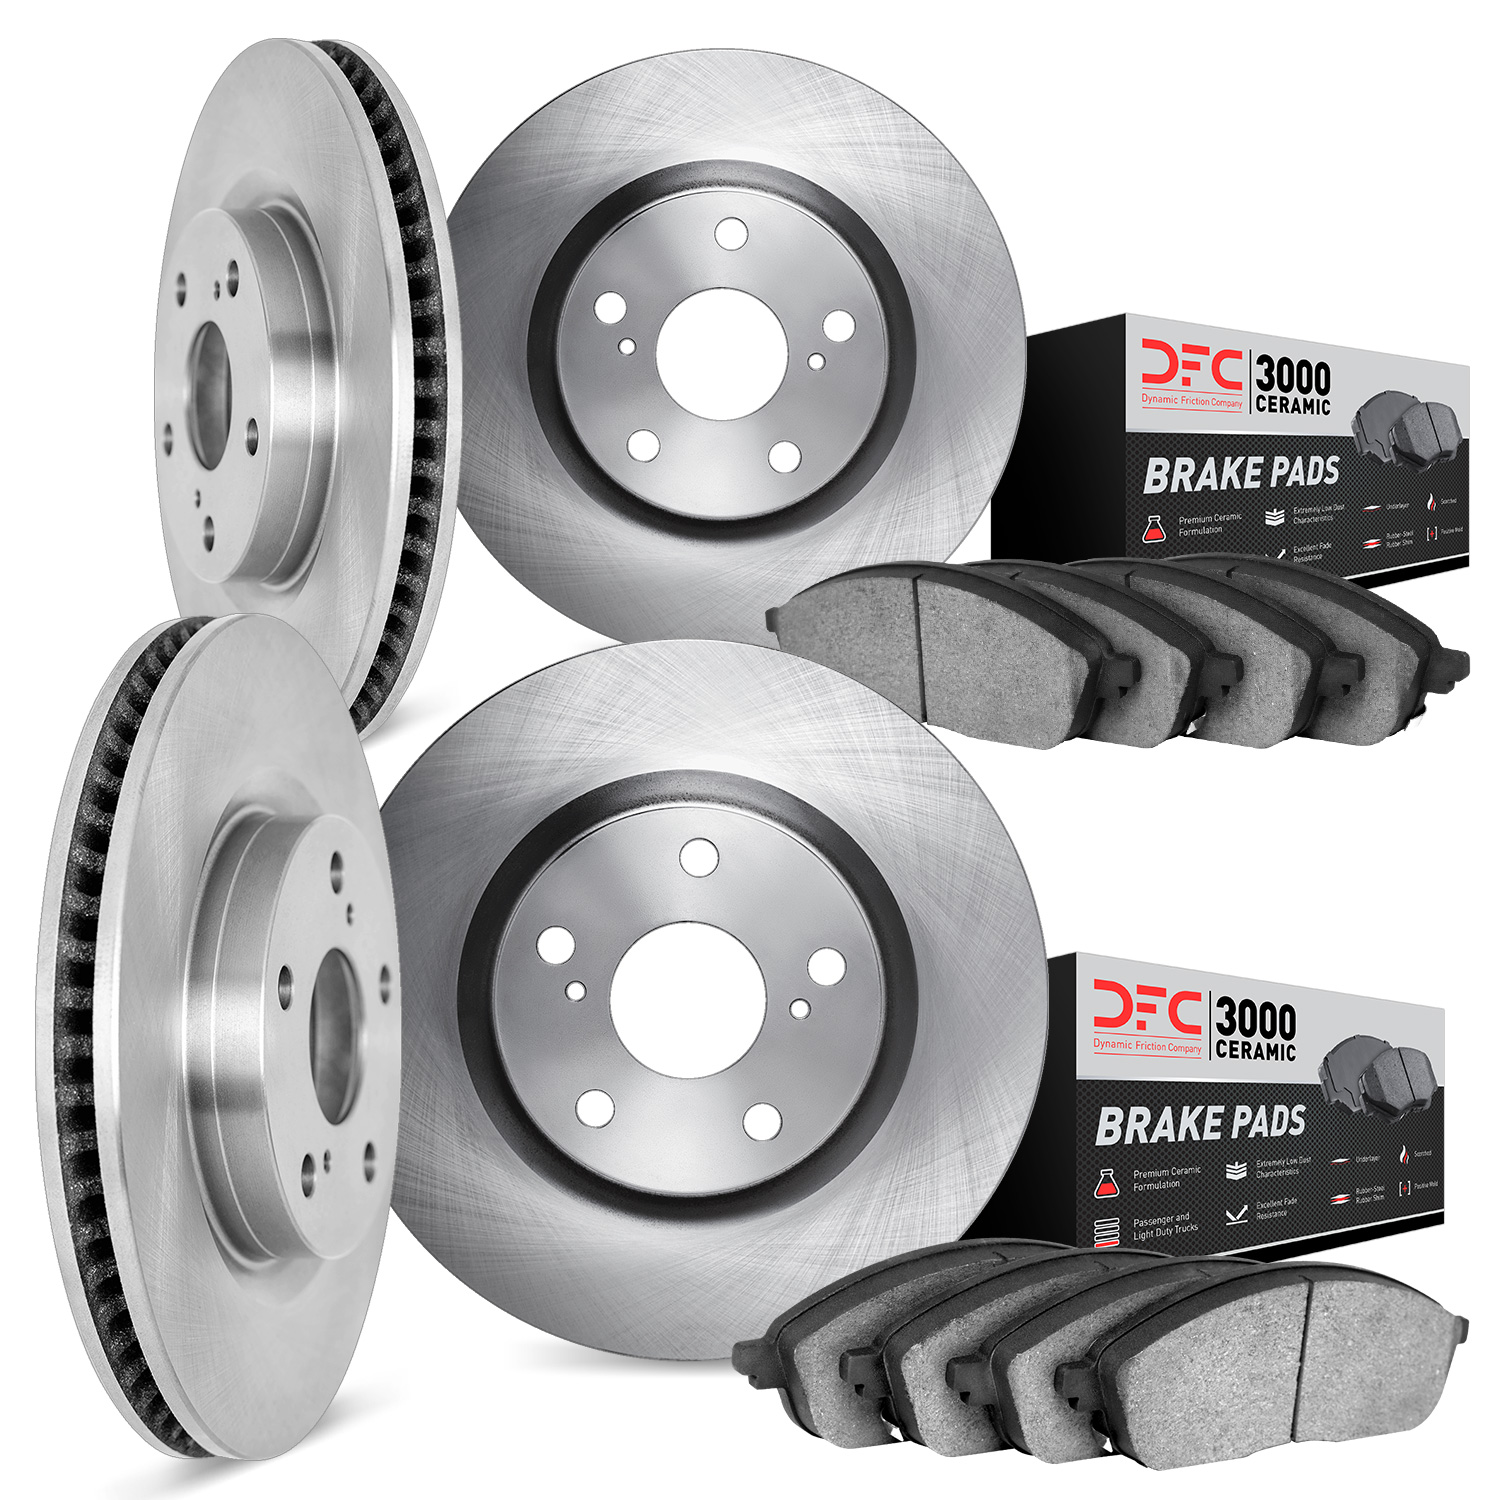 6304-74031 Brake Rotors with 3000-Series Ceramic Brake Pads Kit, 2006-2011 Audi/Volkswagen, Position: Front and Rear